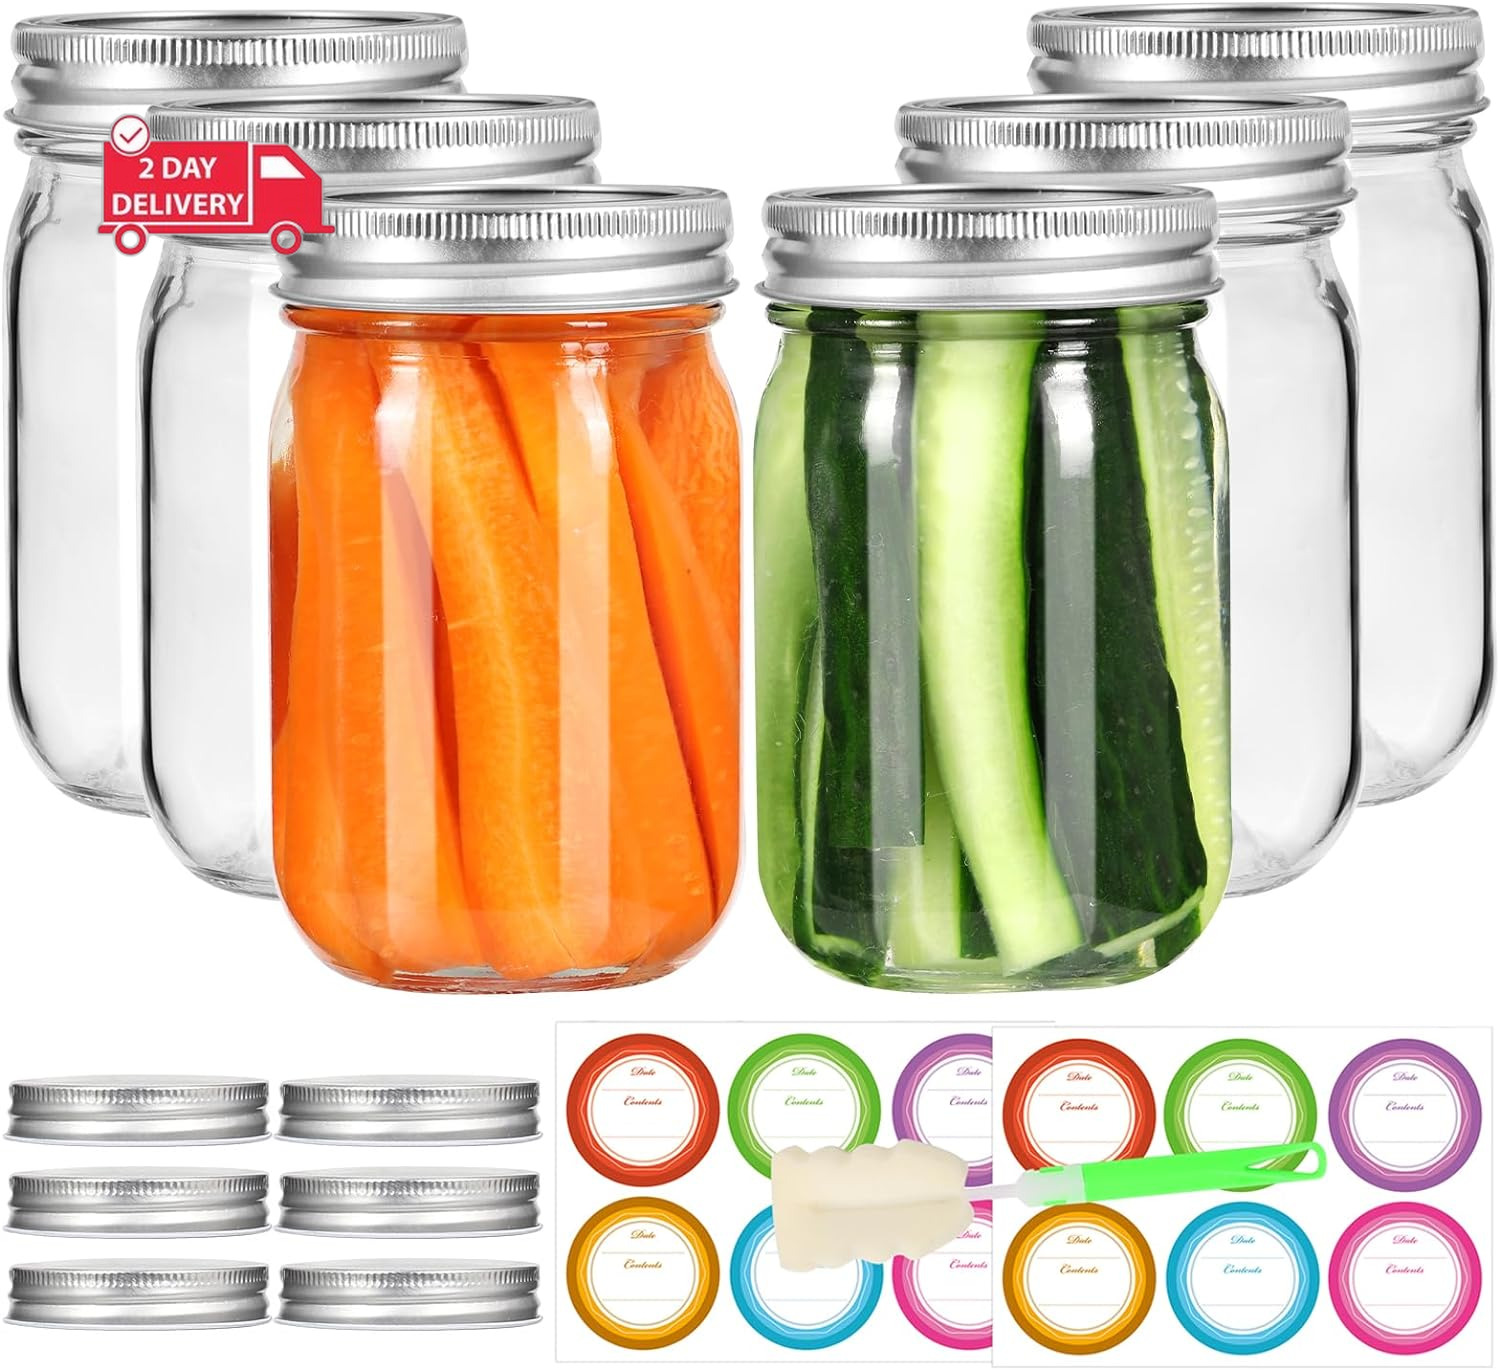 6 Pack Mason Jars 16 Oz with Lids, Canning Jars with 6 Split-Type Lids and EXTRA